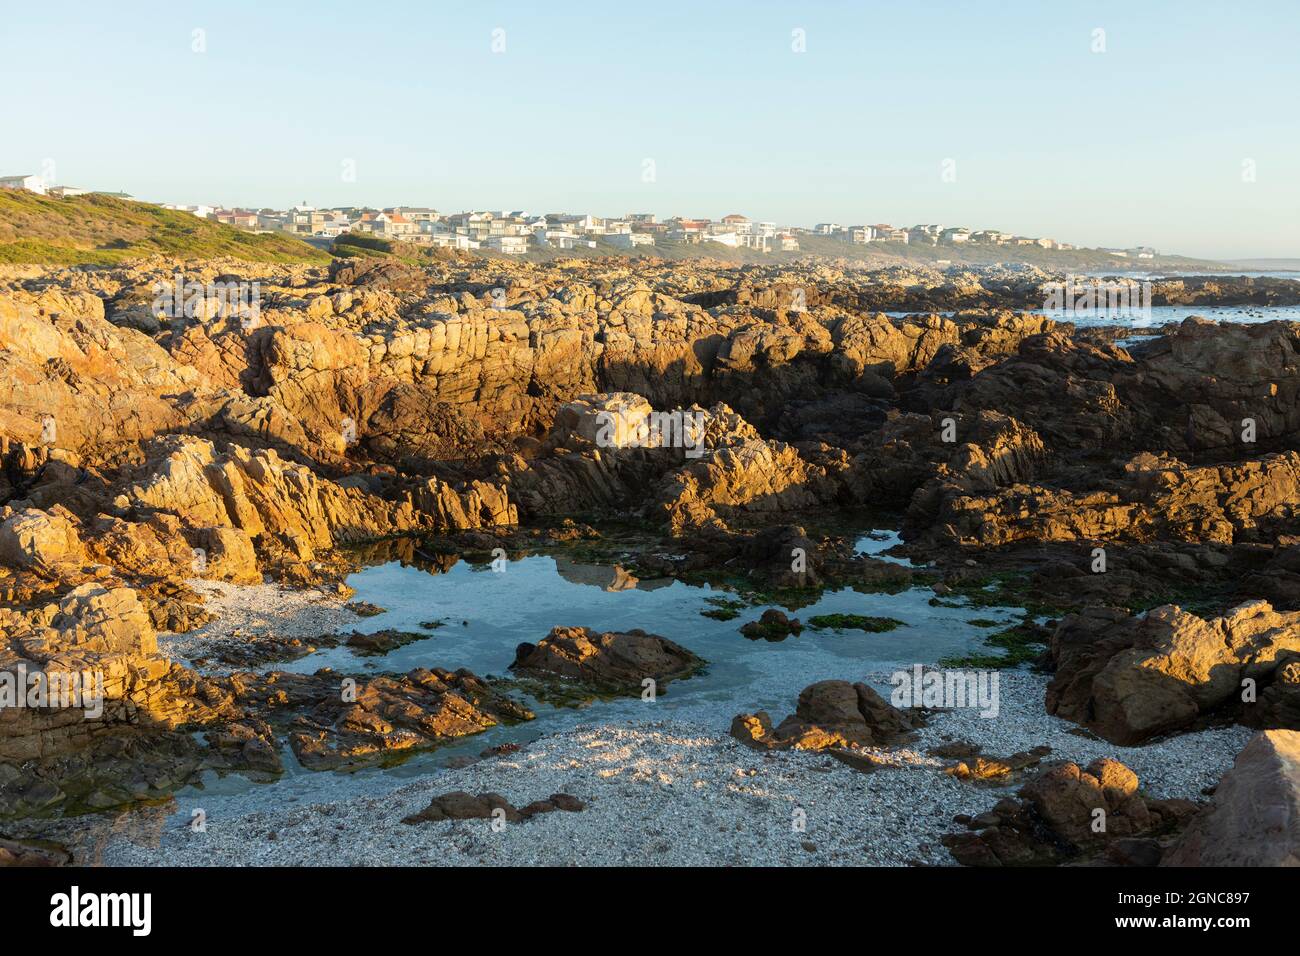 Jagged rocks and rock pools on the Atlantic Ocean coastline and houses on the headland. Stock Photo